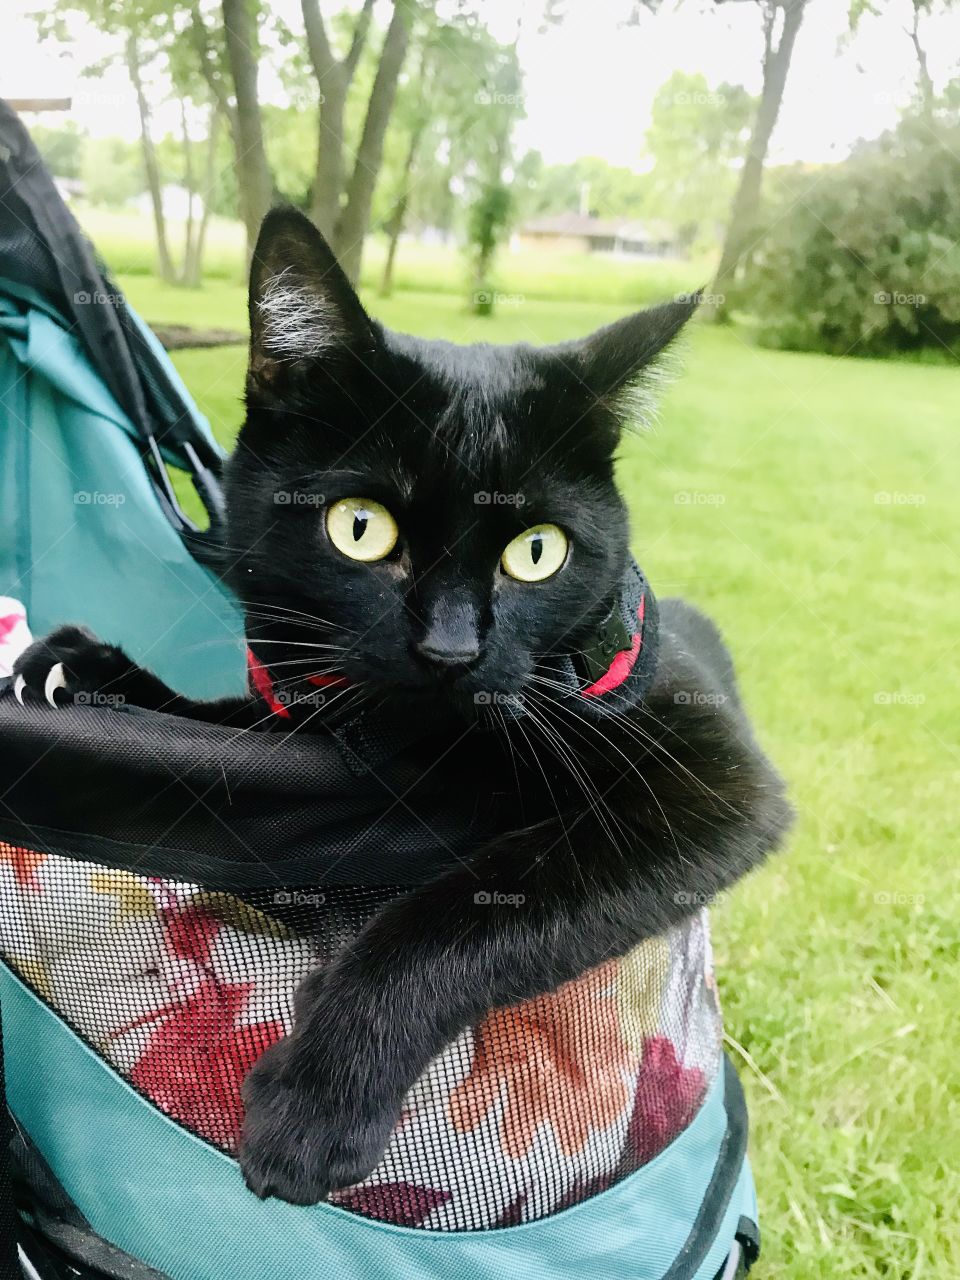 Darling little black kitty sitting in her stroller with her harness on ready for an evening ride!! 